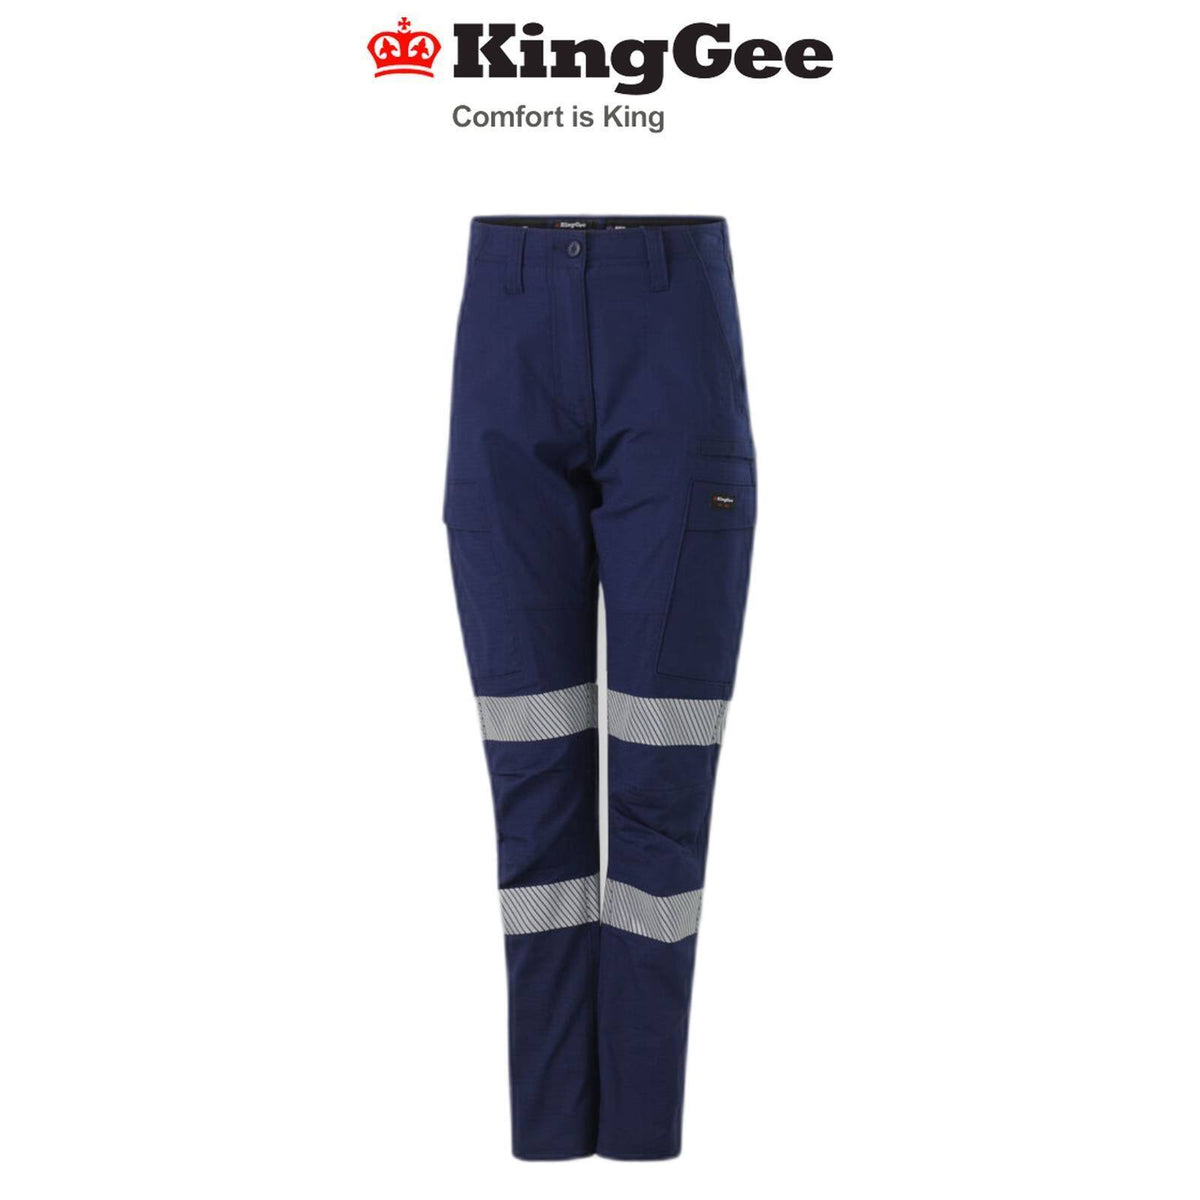 KingGee Womens Safety Workcool Pro Bio Motion Comfort Breathable Pant K43003